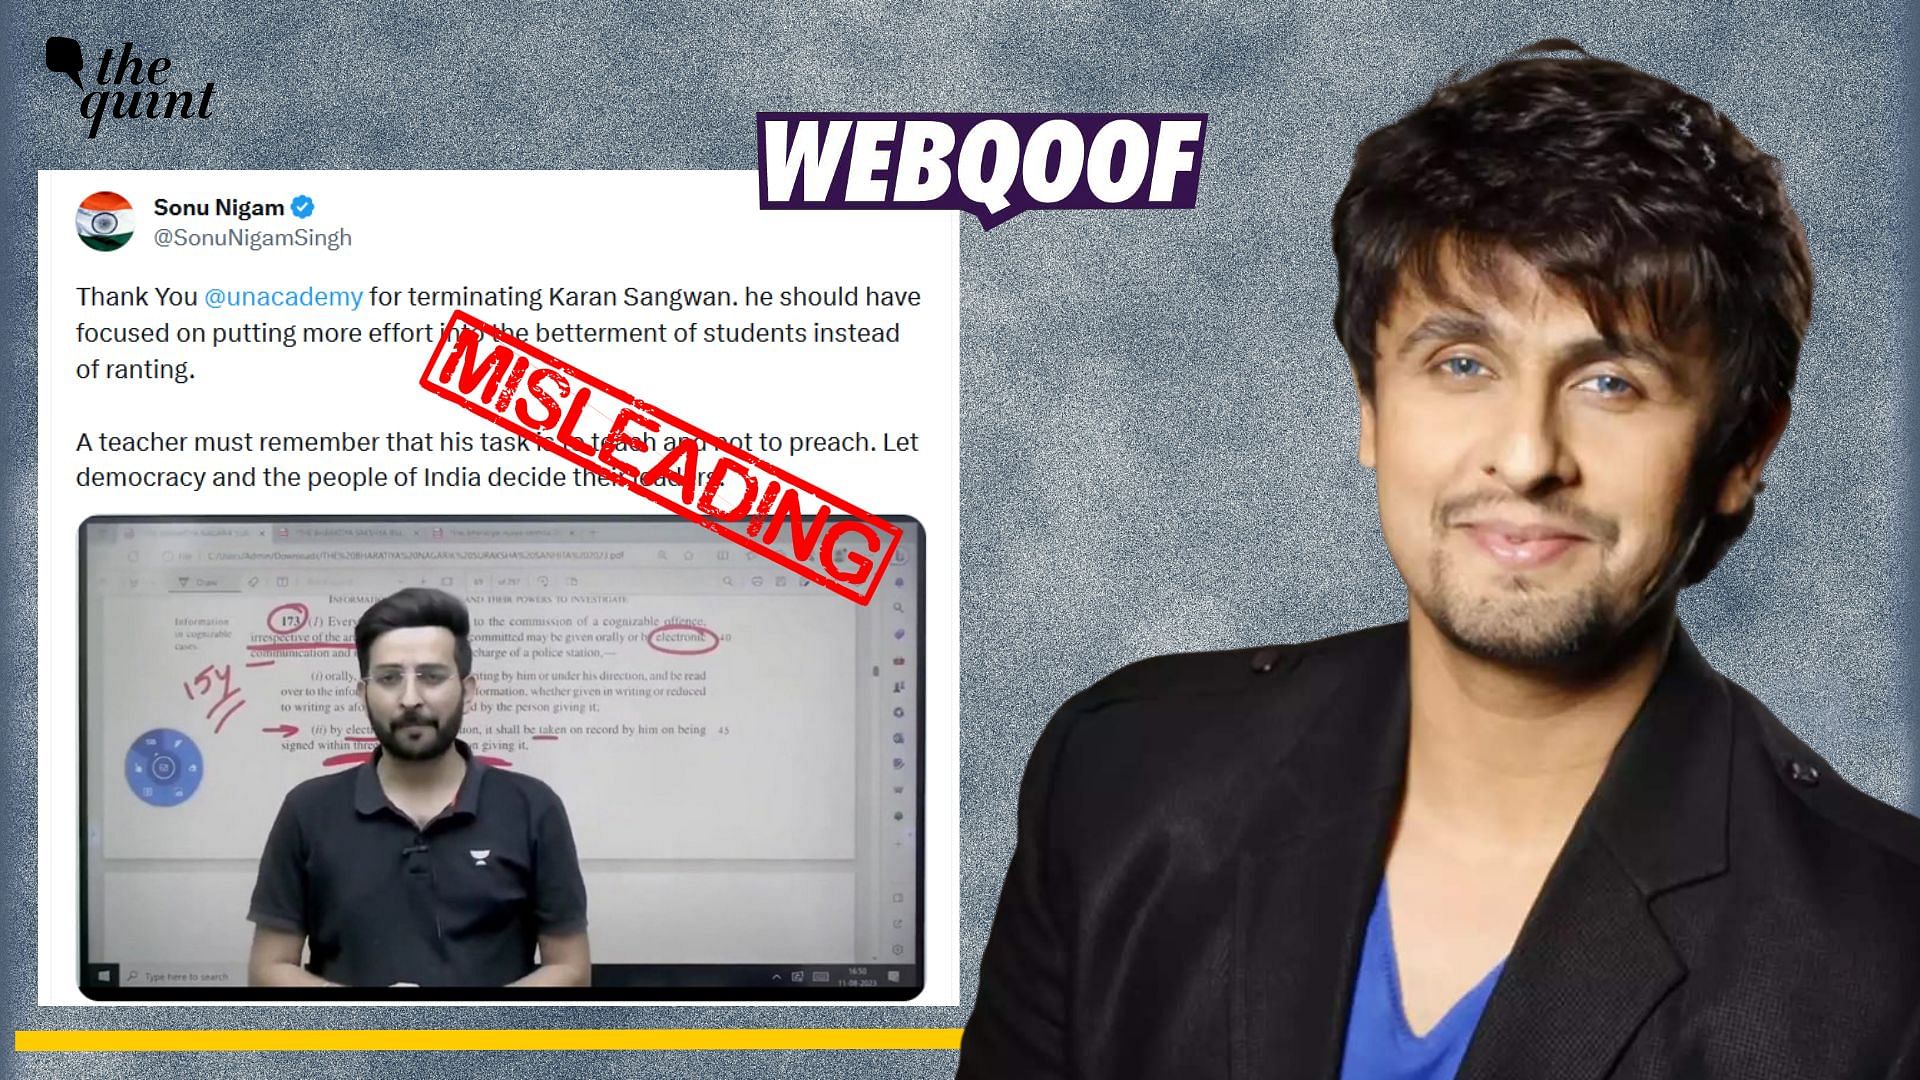 <div class="paragraphs"><p>Fact-check: Singer Sonu Nigam has not passed any statements about the ongoing Unacademy controversy as claimed.</p></div>